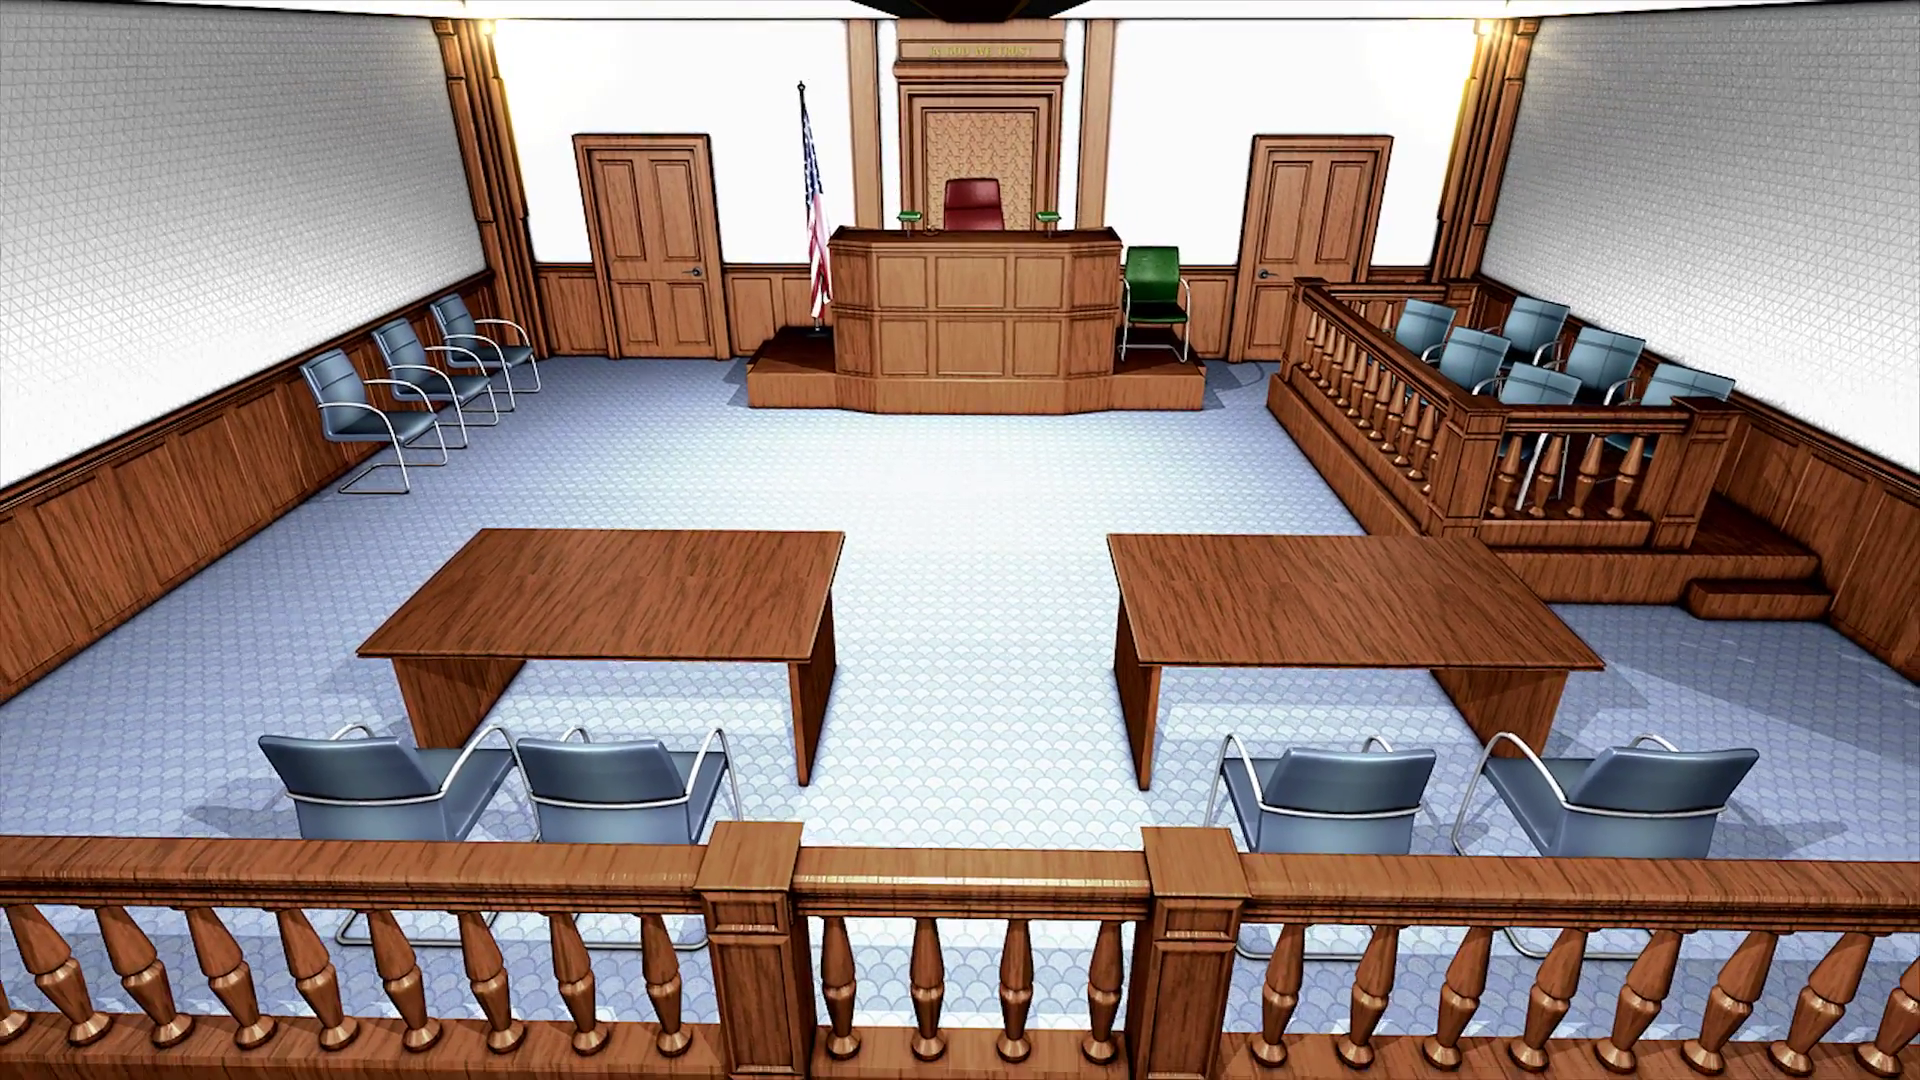 Courtroom PNG HD - 144403